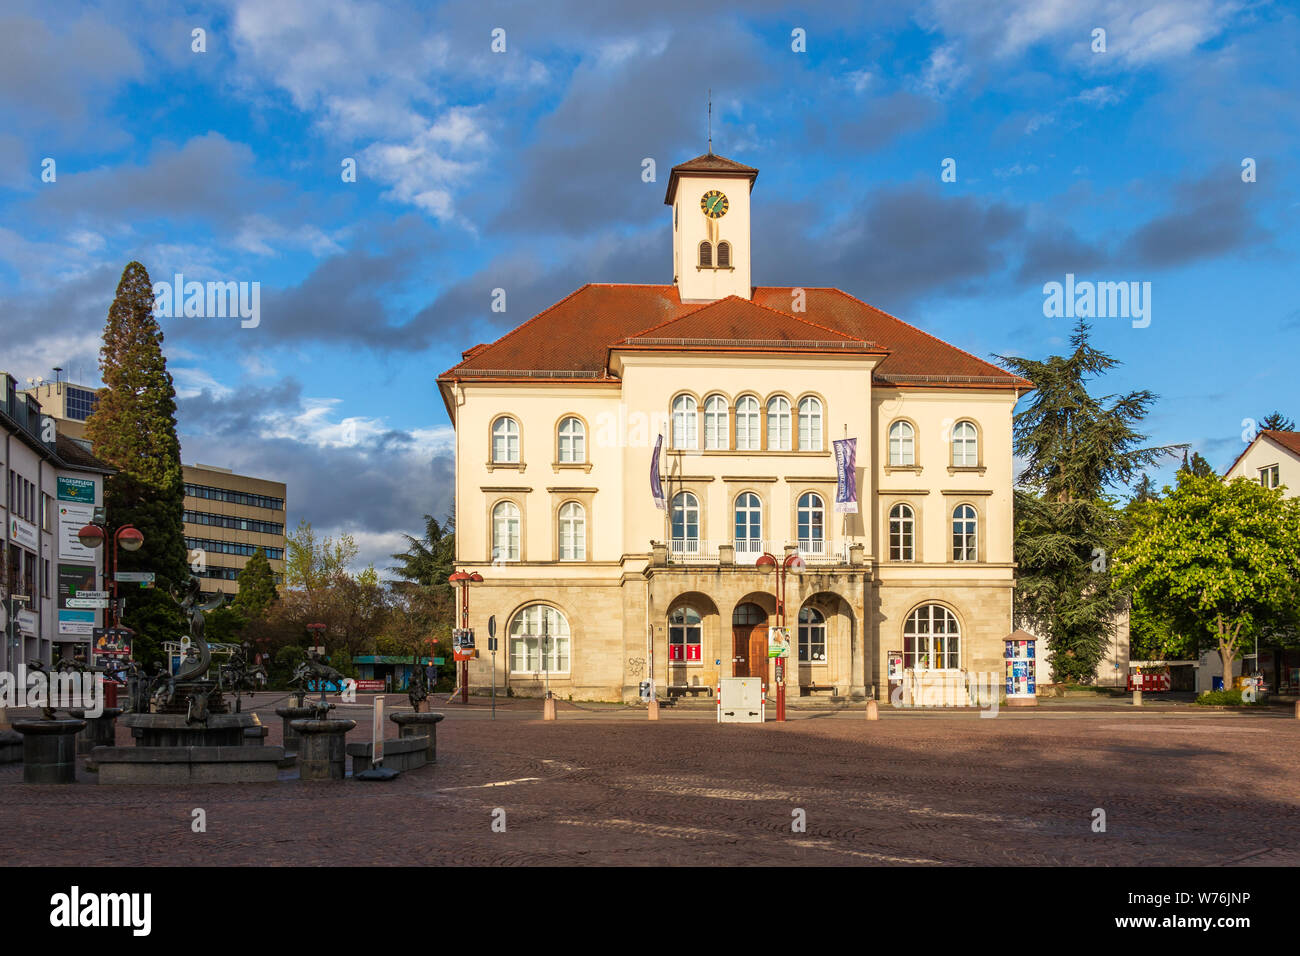 Sindelfingen, Baden Wurttemberg/Germany - May 11, 2019: Panorama of City Gallery building, Stadtgalerie and market fountain. Stock Photo